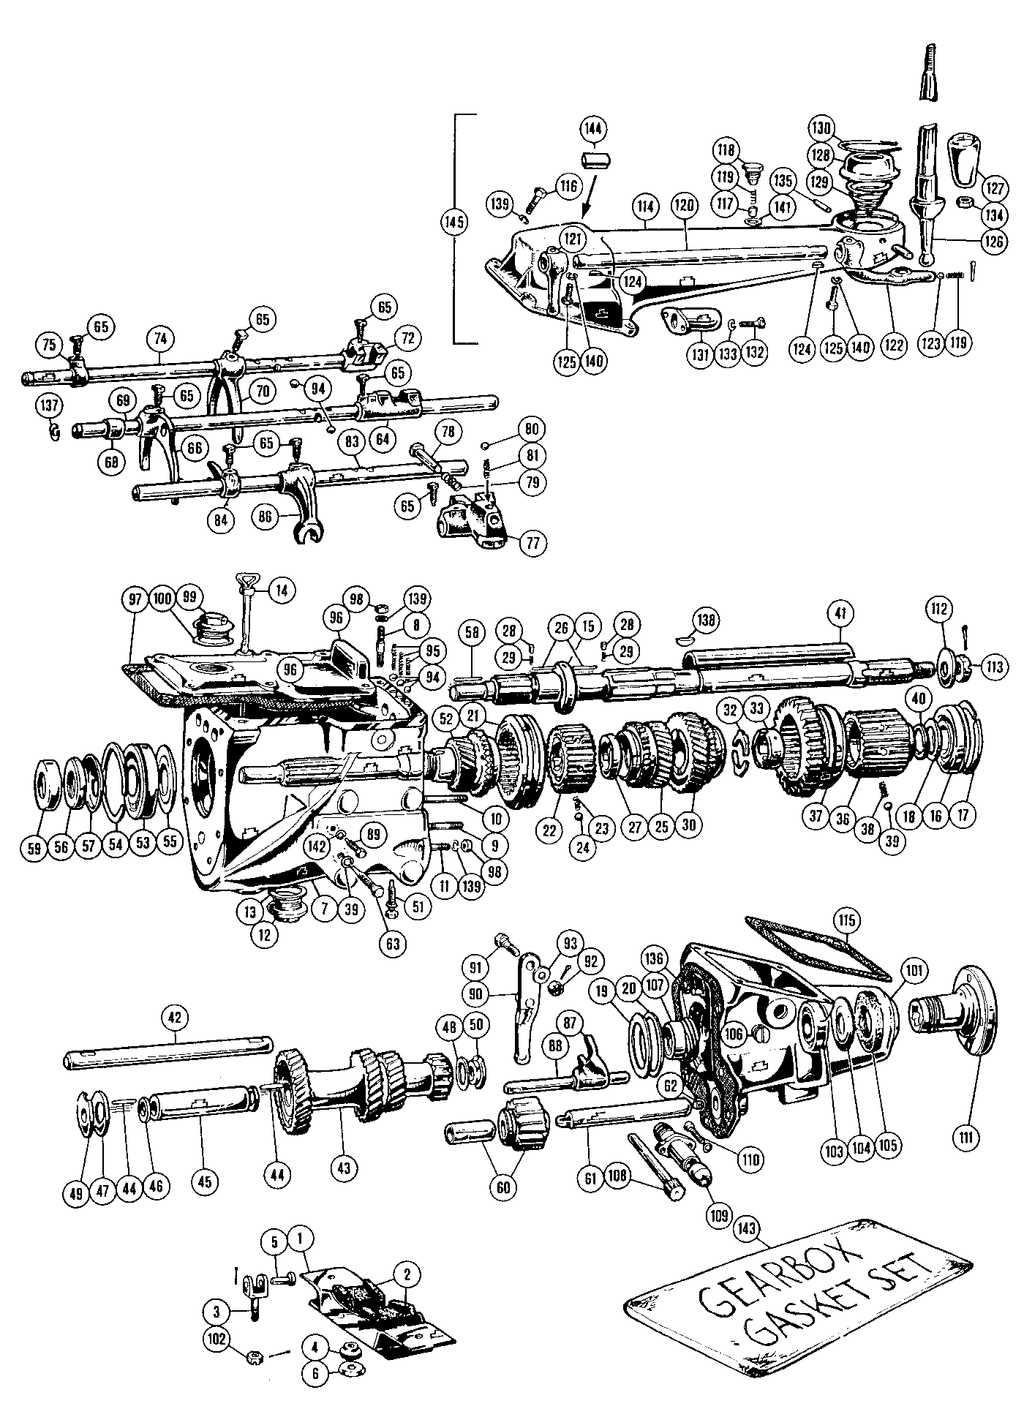 MGTD-TF 1949-1955 - Gear linkages | Webshop Anglo Parts - Gearbox - 1